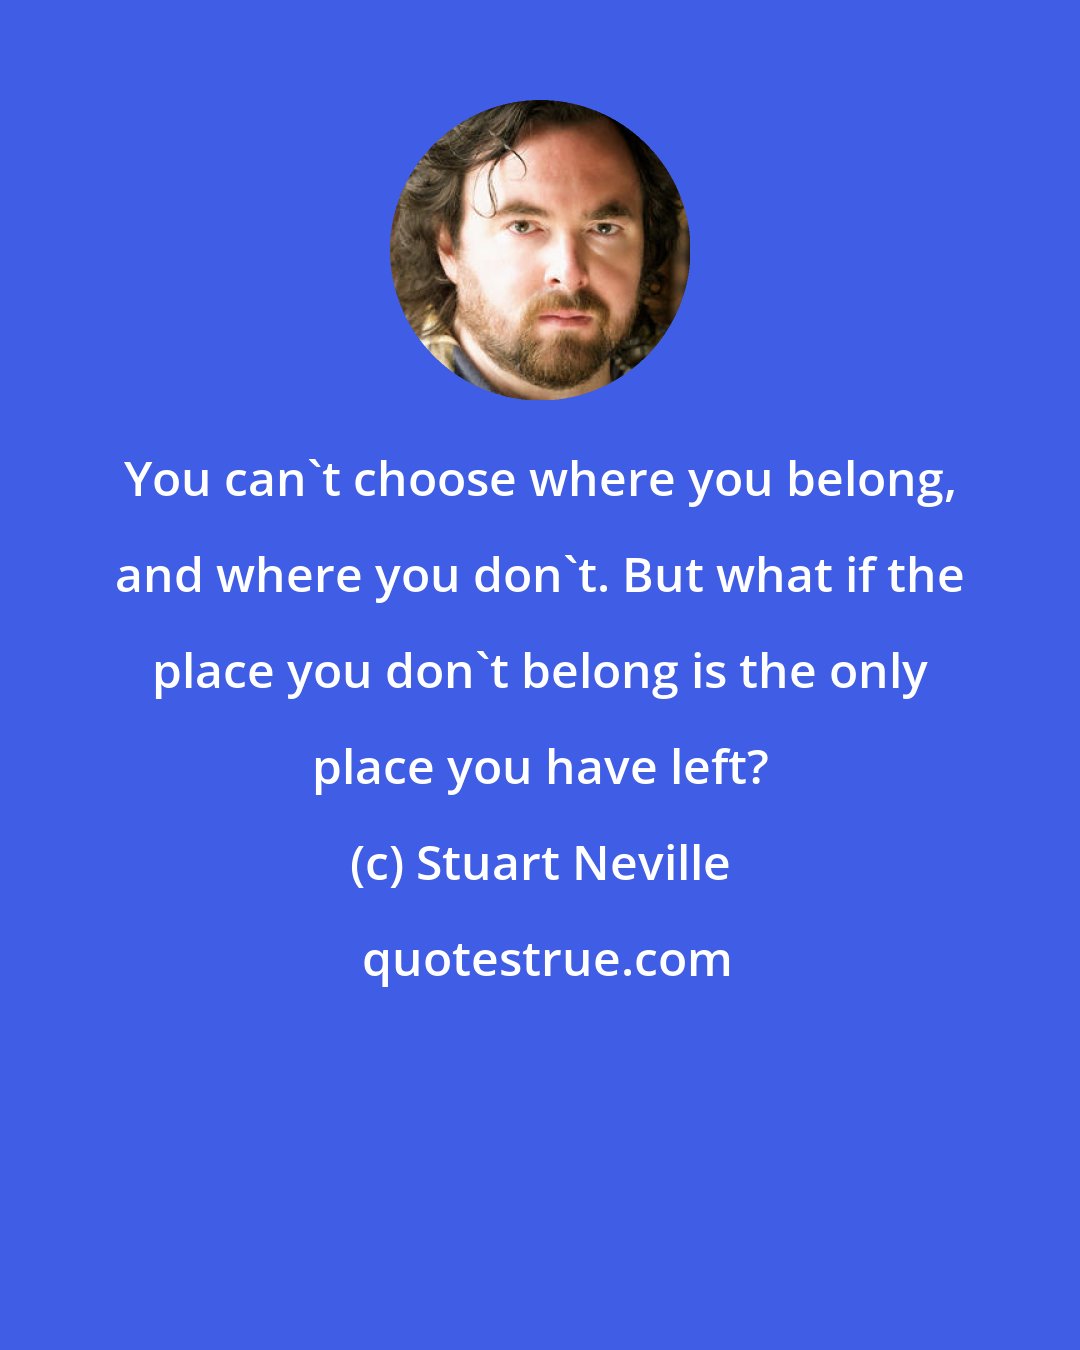 Stuart Neville: You can't choose where you belong, and where you don't. But what if the place you don't belong is the only place you have left?